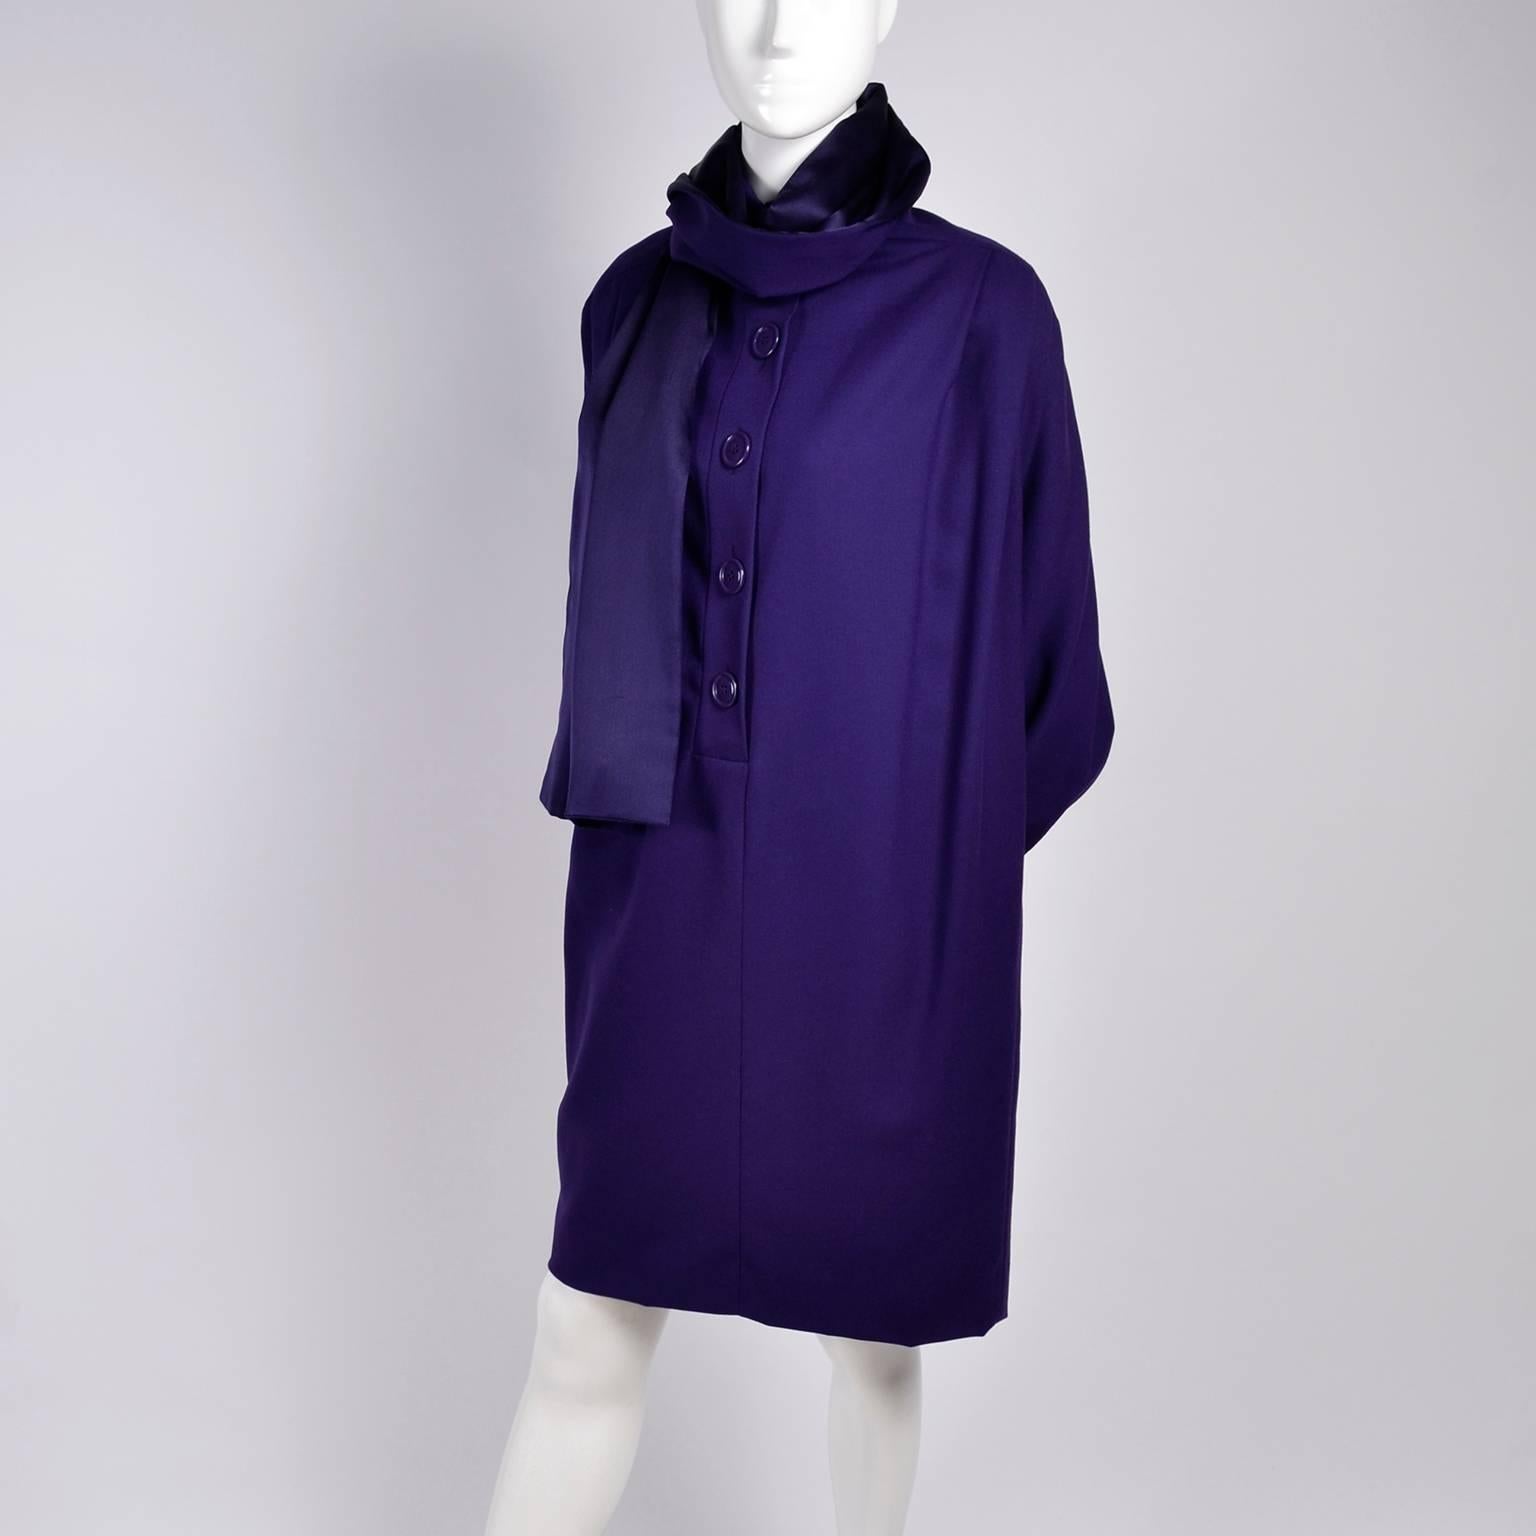 Ferre Italy Purple Wool 1990s Vintage Dress with Scarf M/L 3